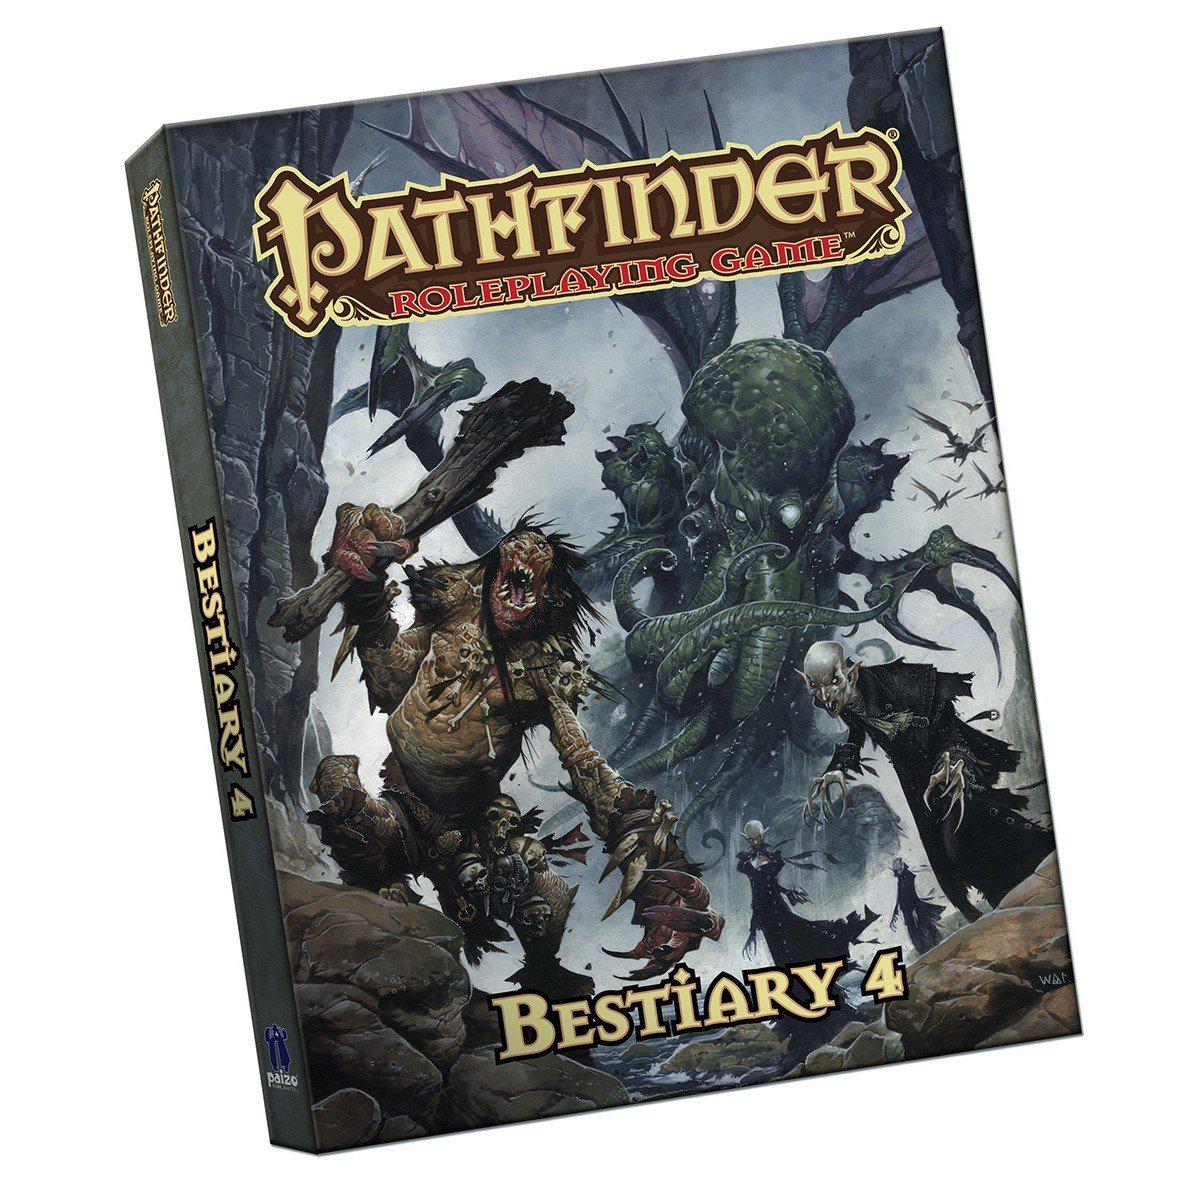 Pathfinder Roleplaying Game: Bestiary 4 - The Sword & Board